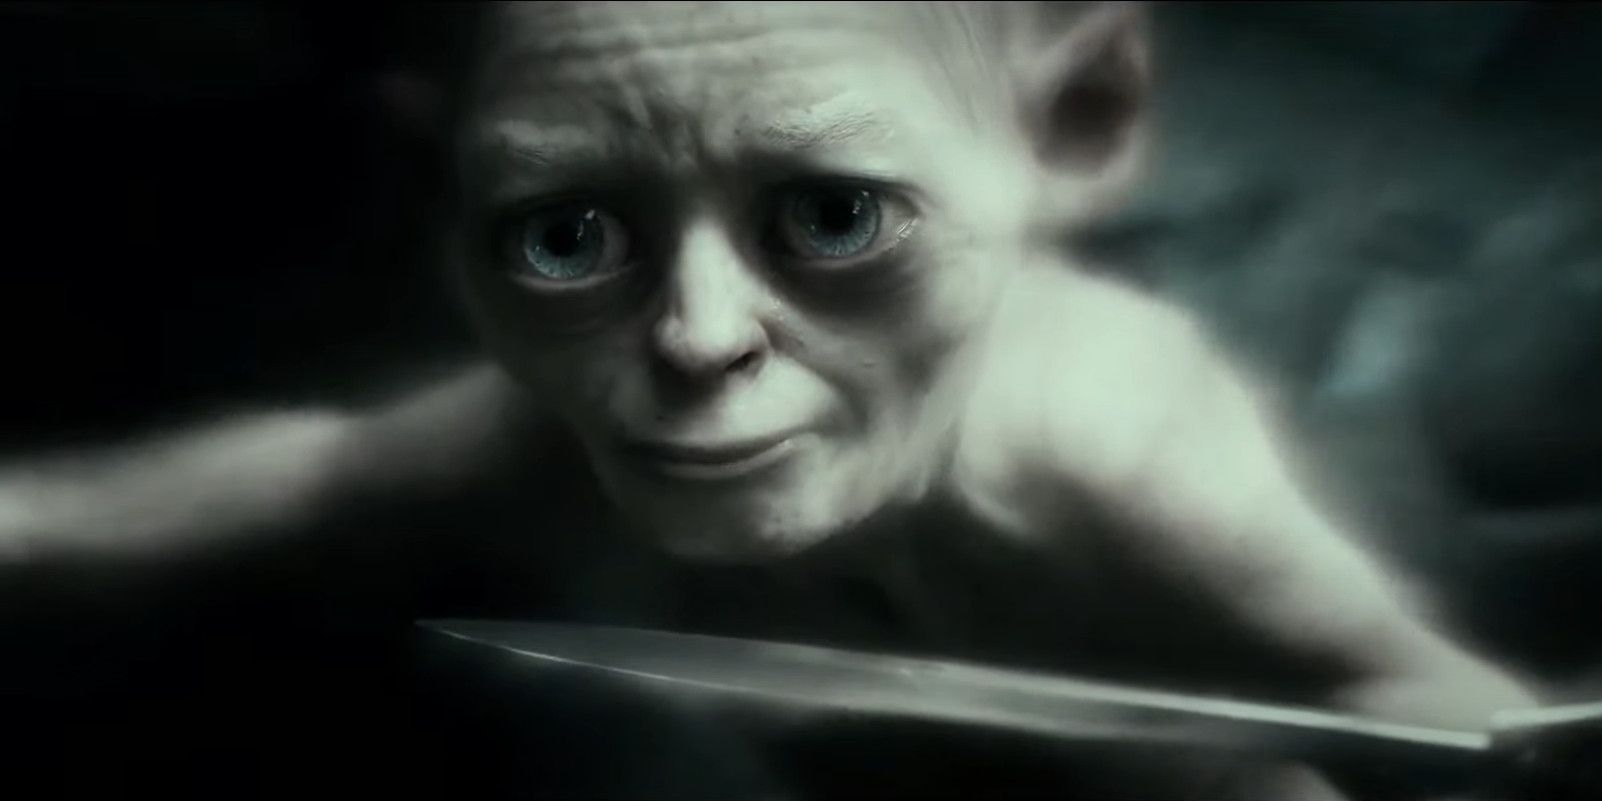 Bilbo threatens Gollum (who can't seem him) with Sting in The Hobbit: An Unexpected Journey